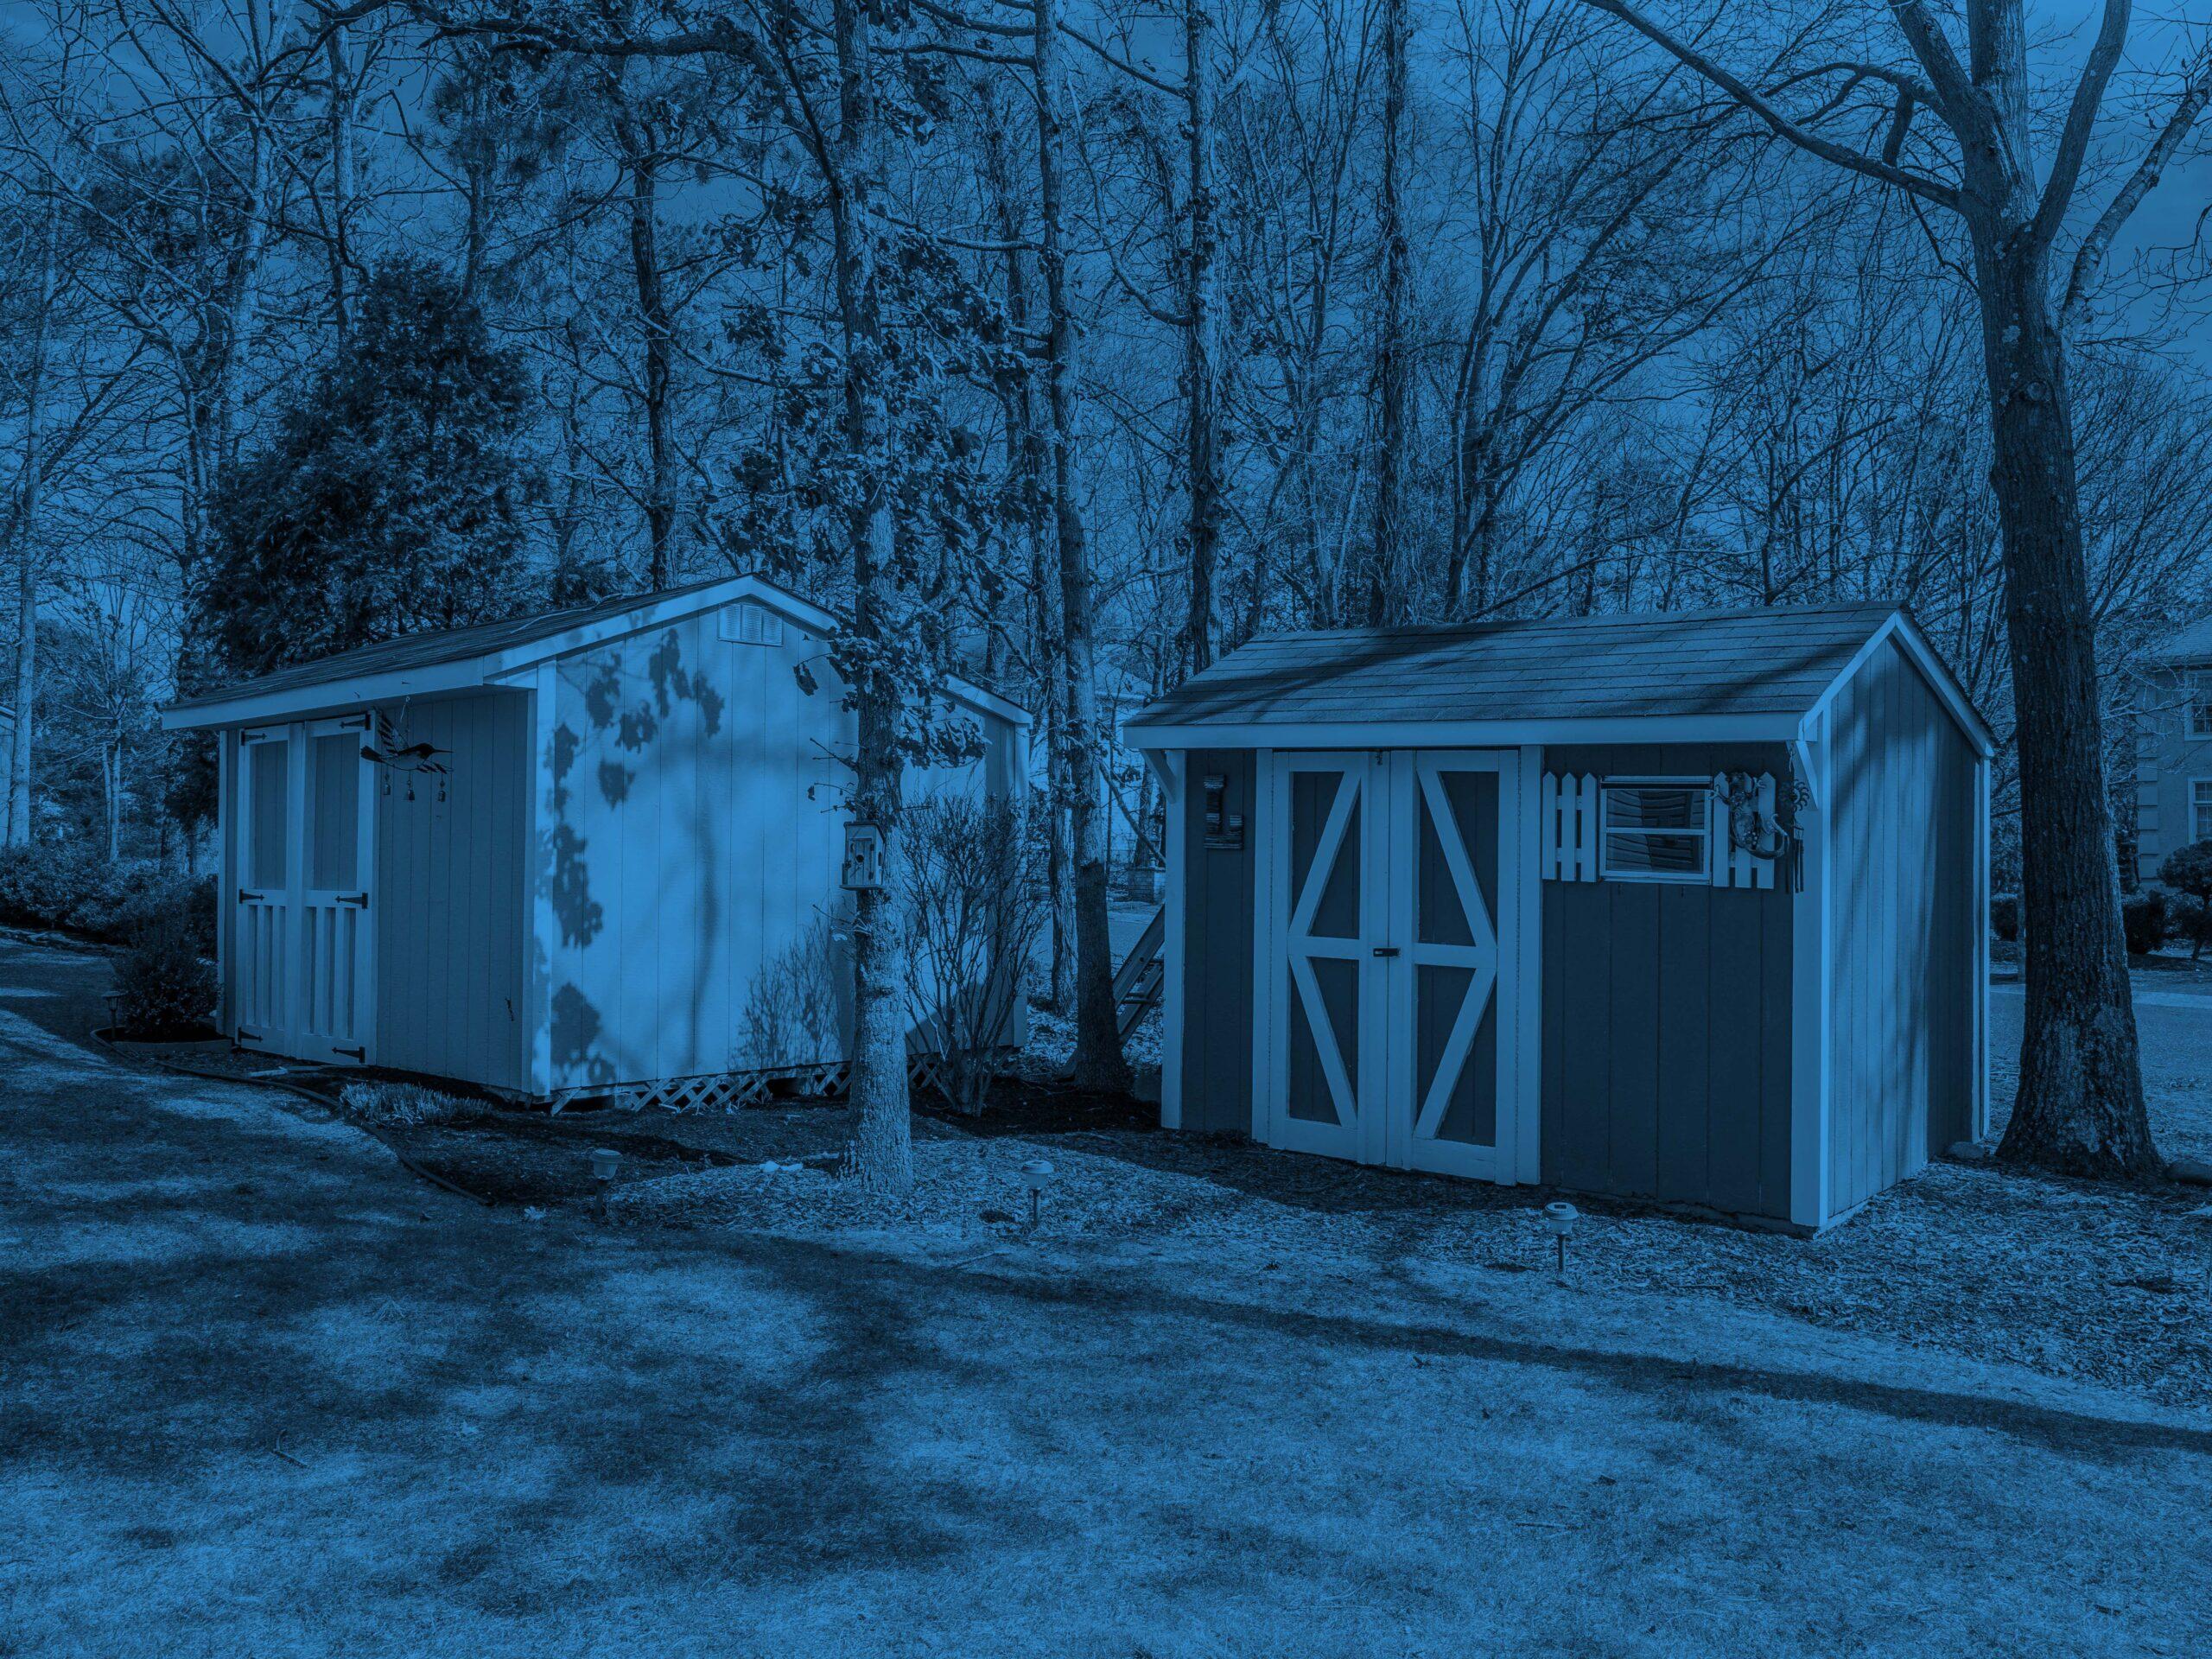 Champion Portable Buildings with blue overlay